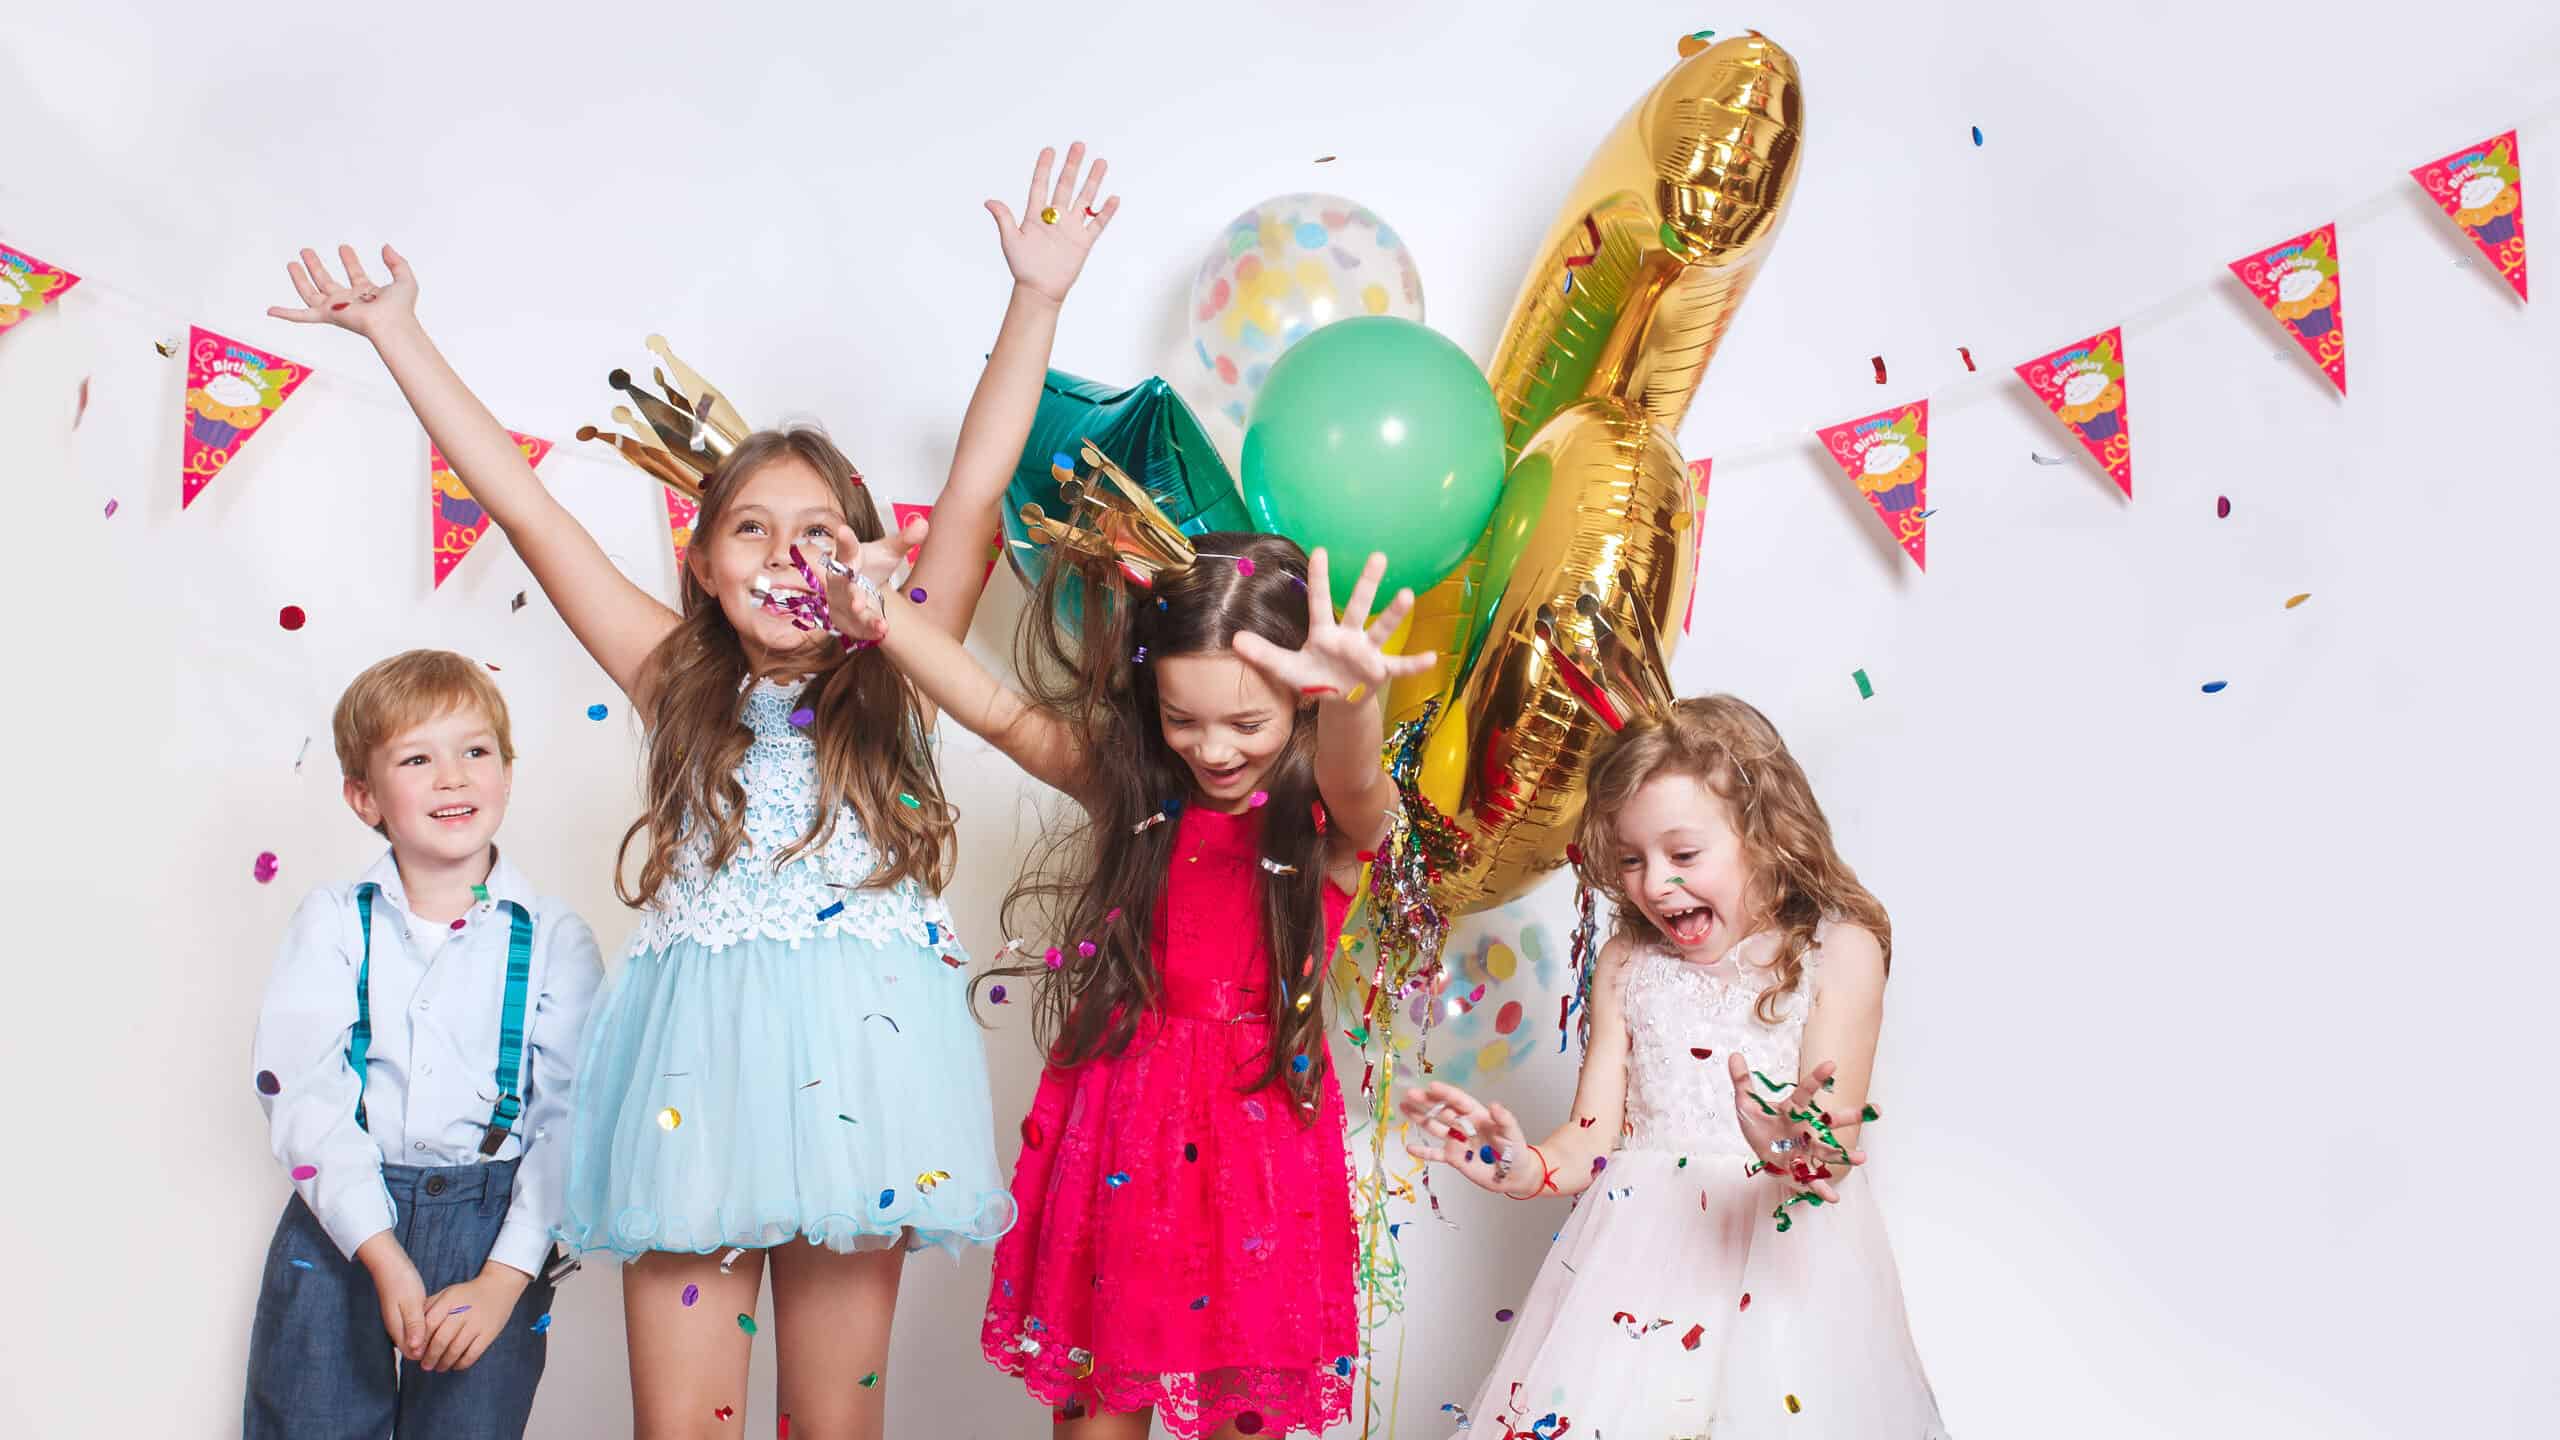 Group,Of,Kids,Throwing,Colorful,Confetti,And,Looking,Happy,On